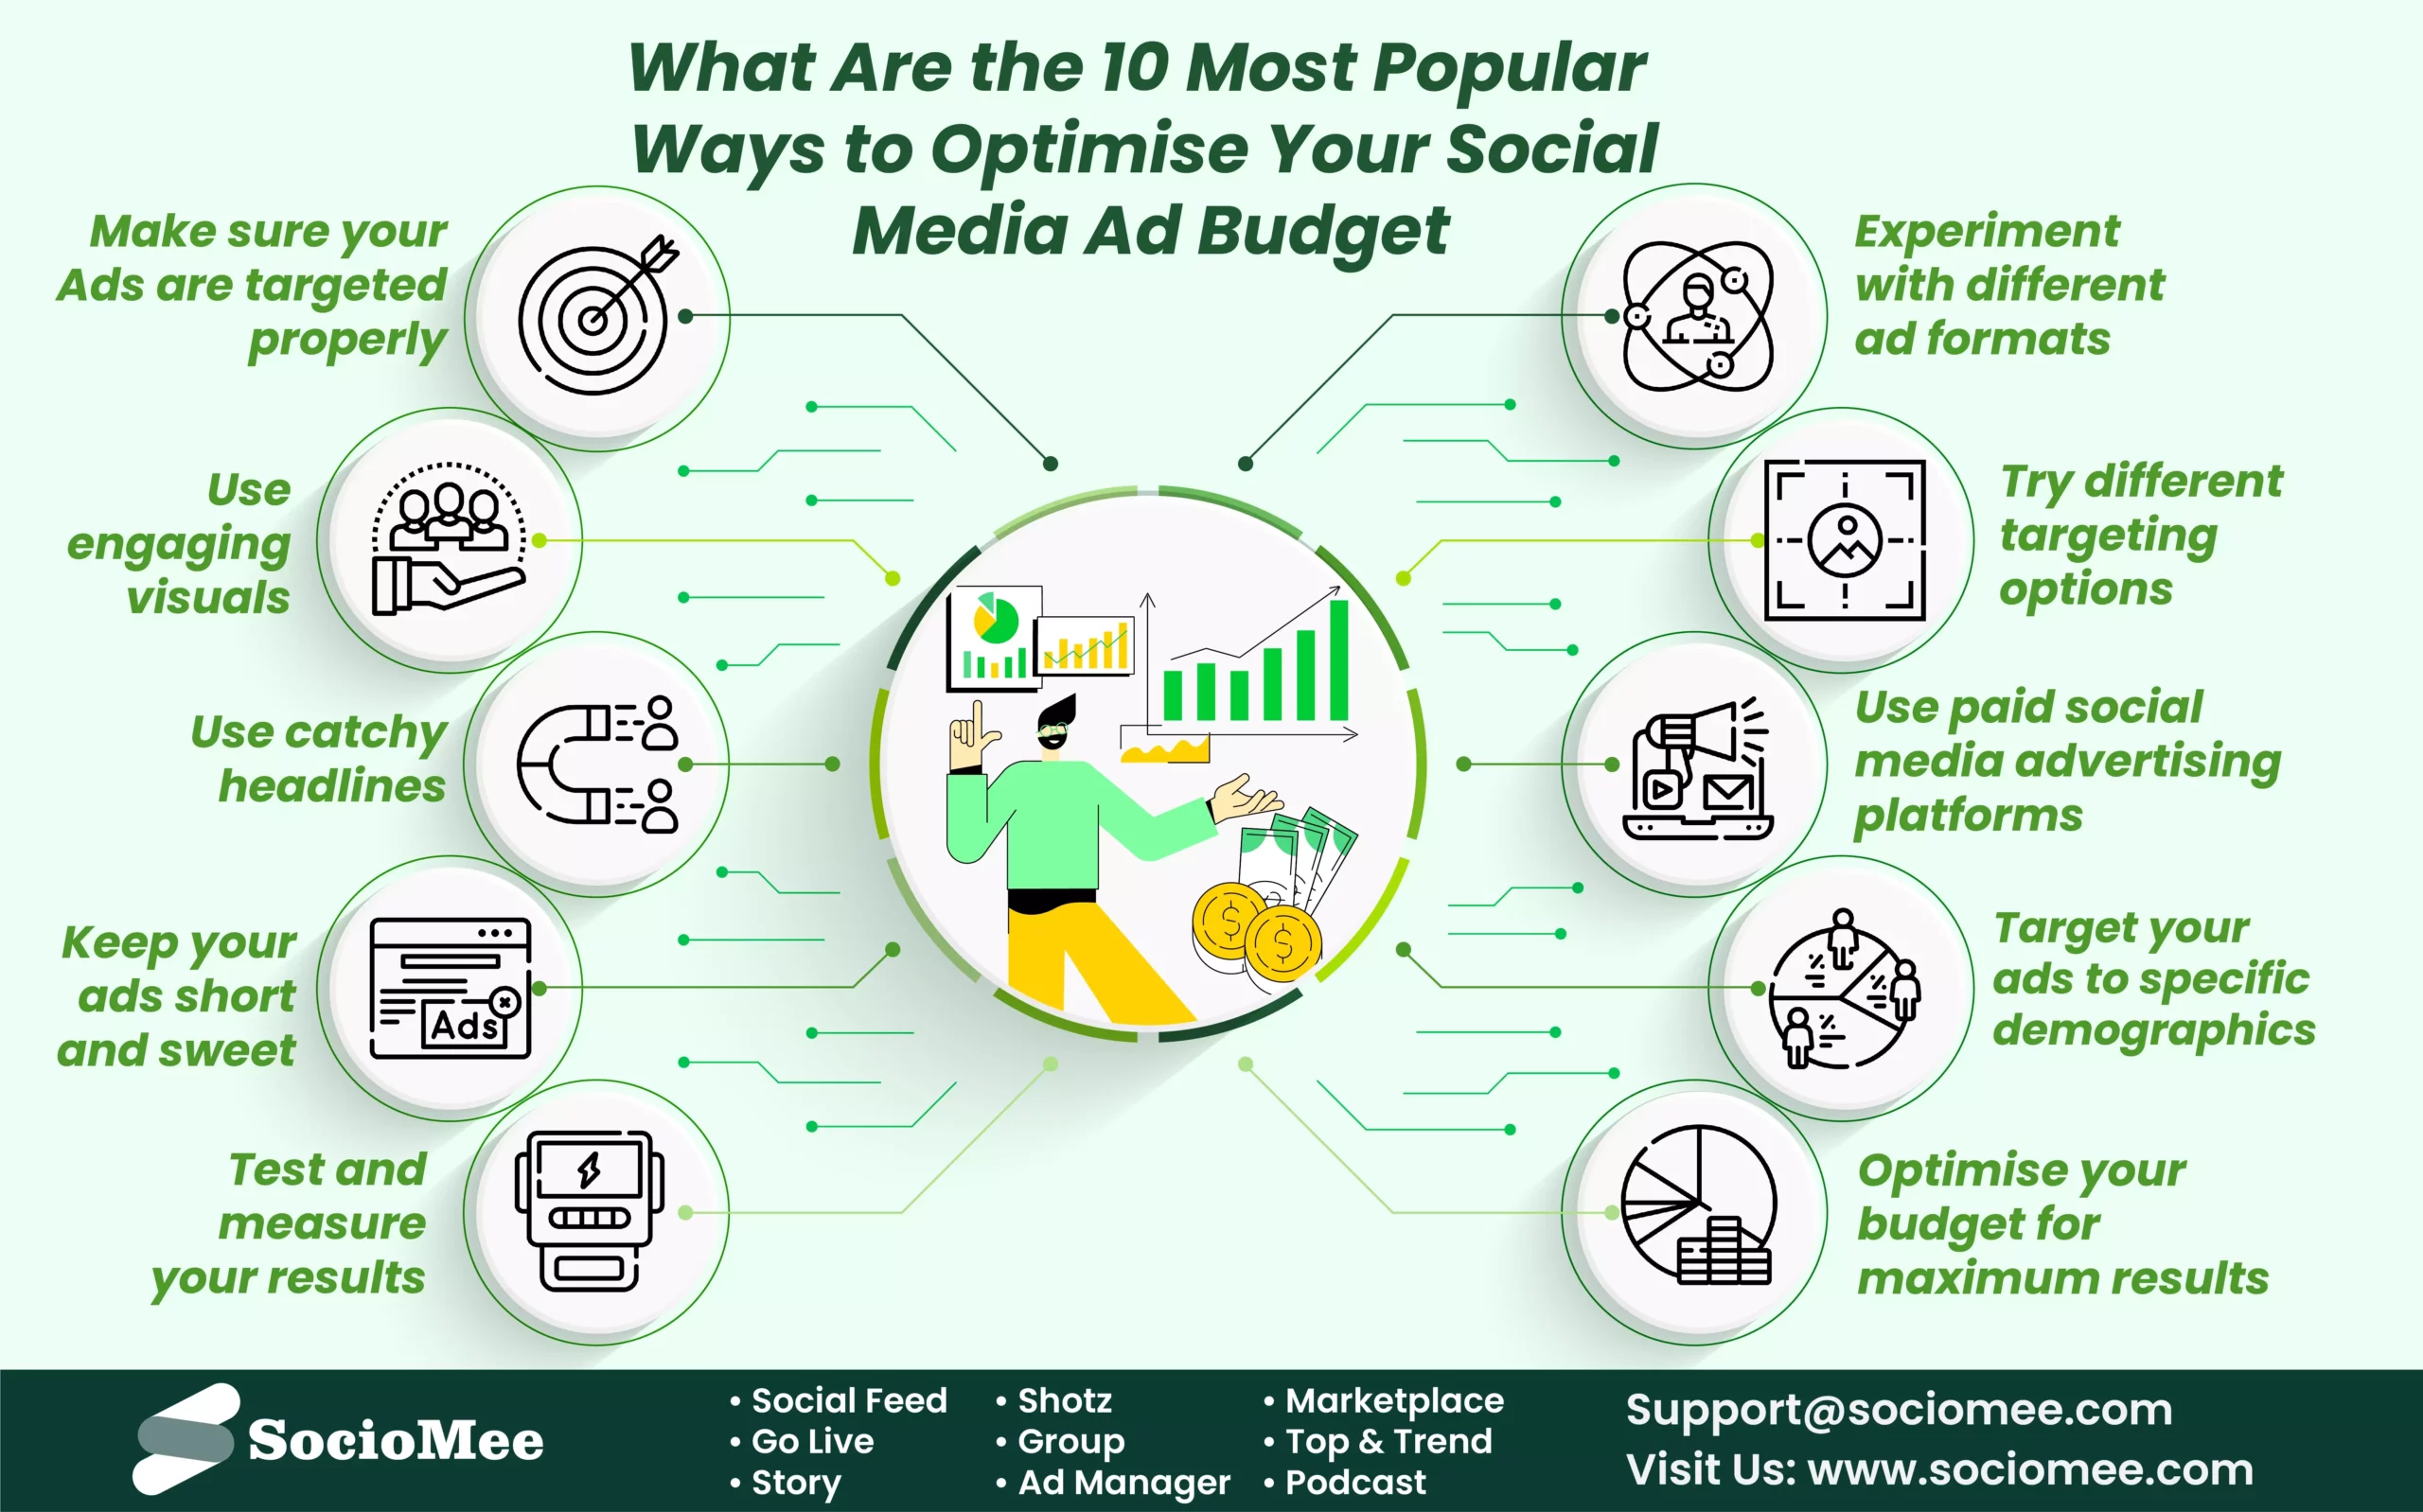 Optimise Your Social Media Ad Budget